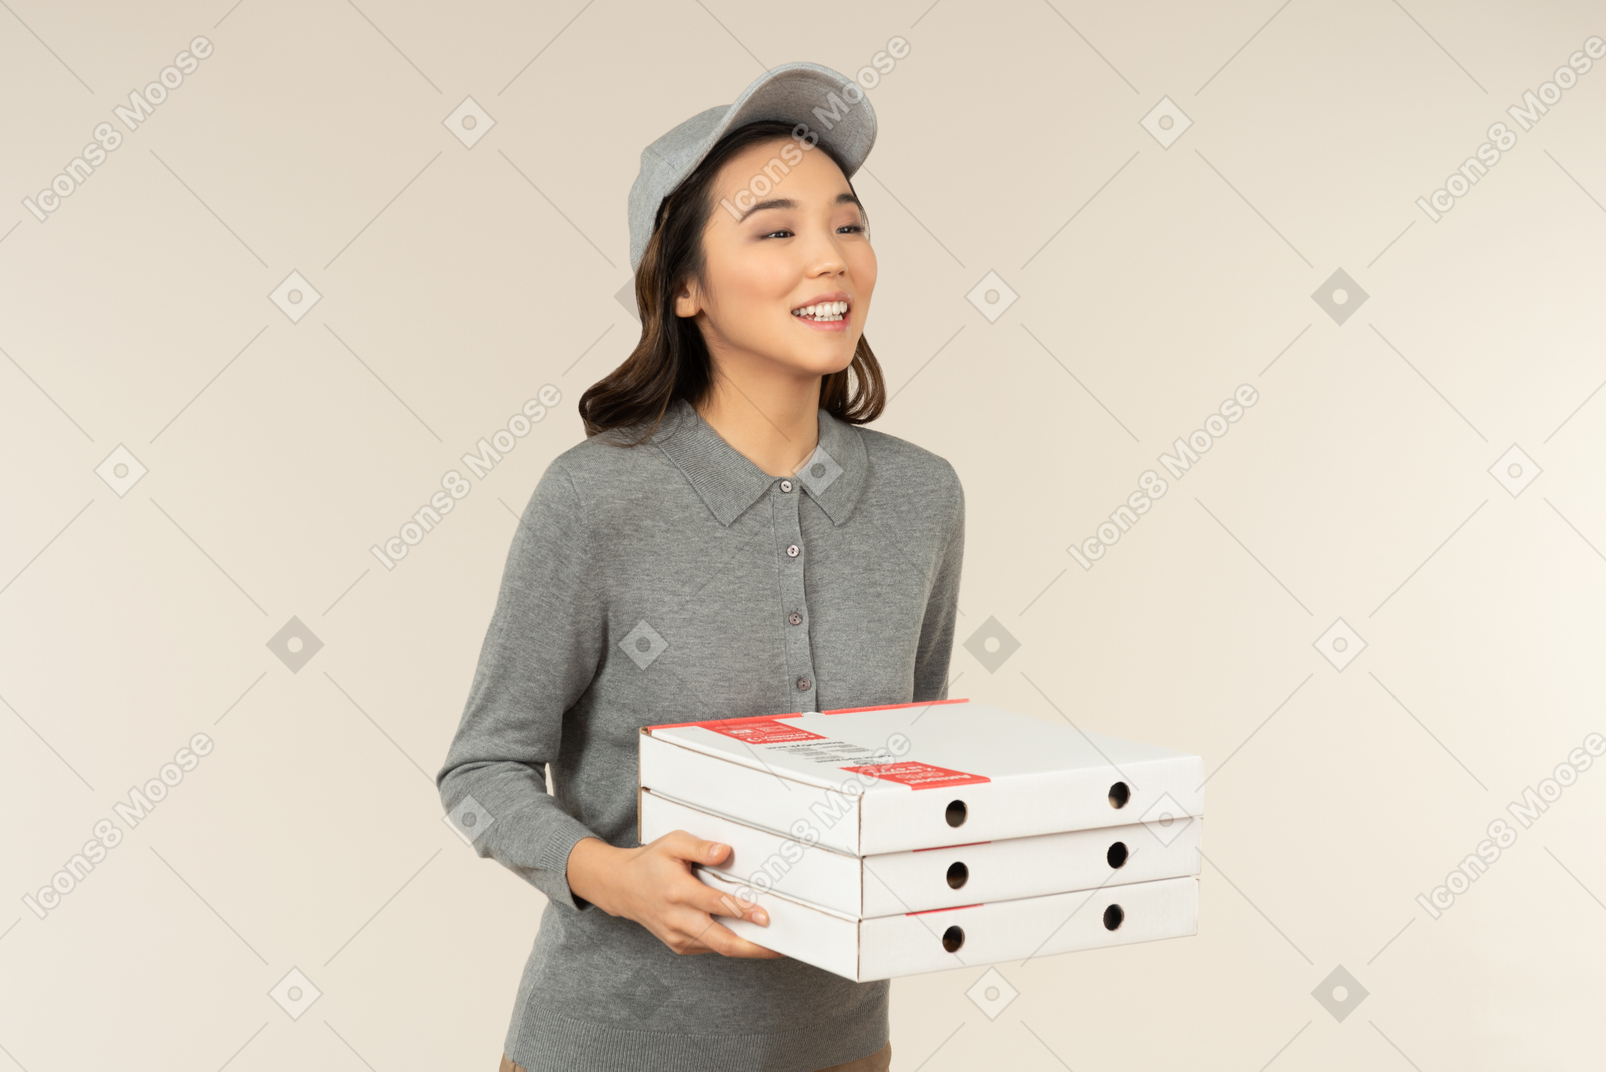 Getting pizza right to the door